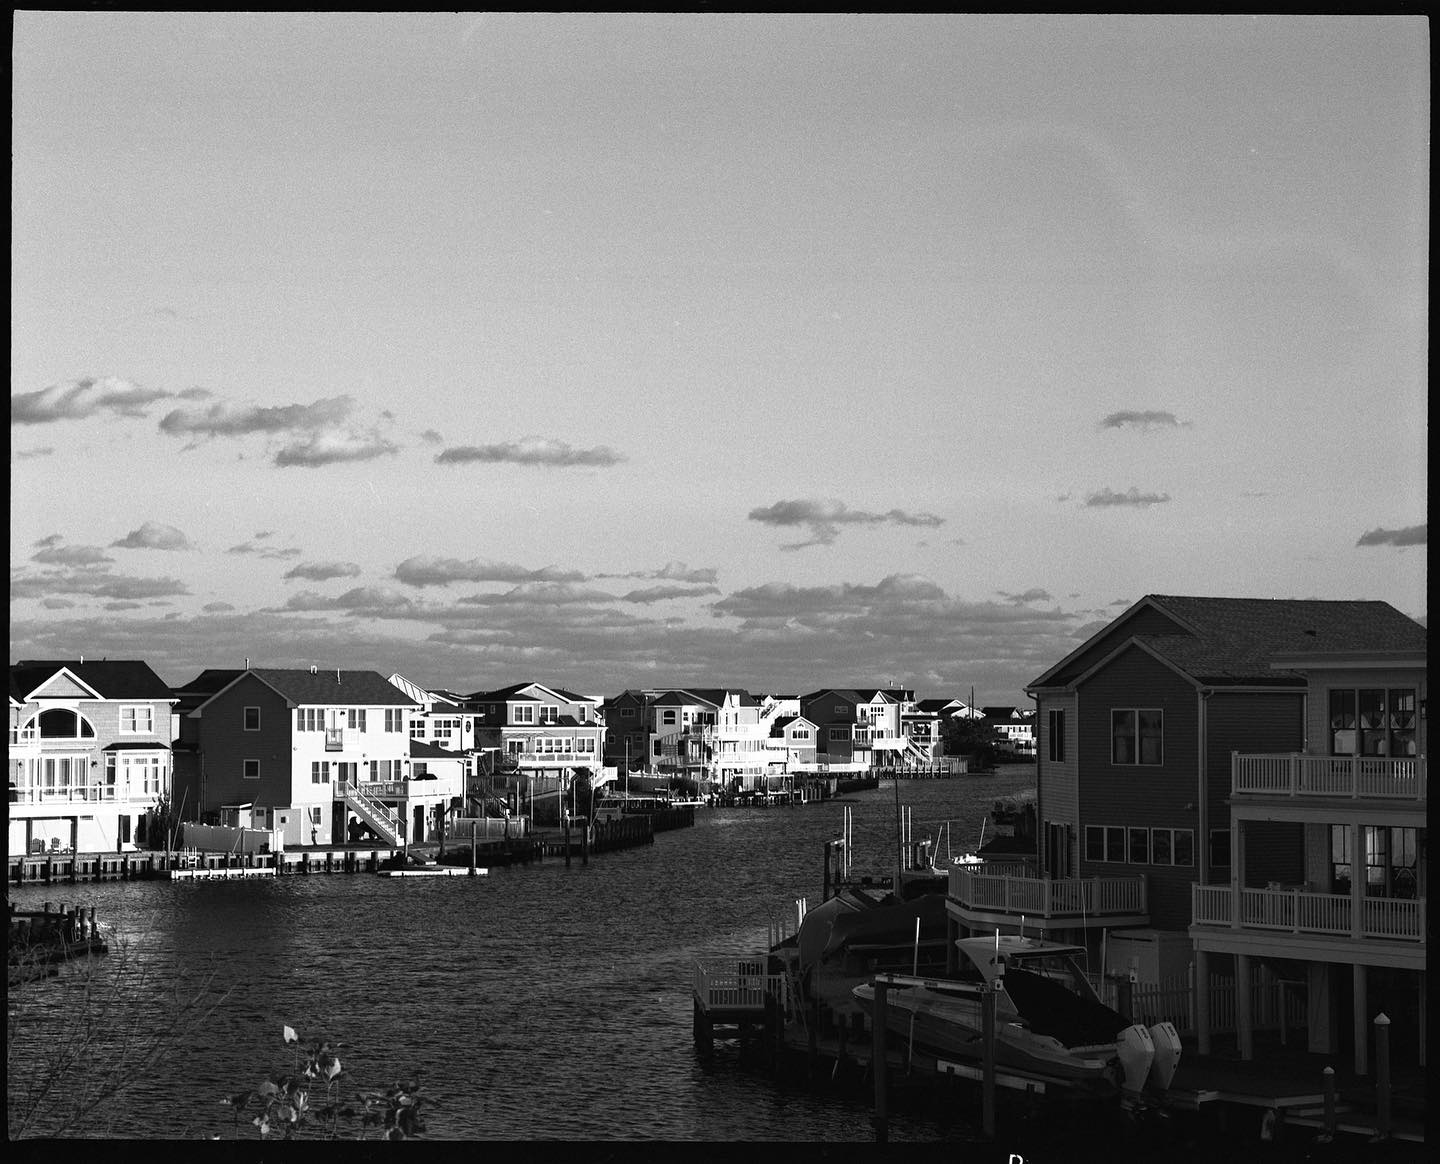 Lagoon

This time last week, I was hanging out with friends in a house on a lagoon just across from Long Beach Island. This was a view from the porch on the third floor. 
#pentax67 #pentax67_165mm #jchstreetpan400 #rodinal #film #filmphotography #filmphotographic